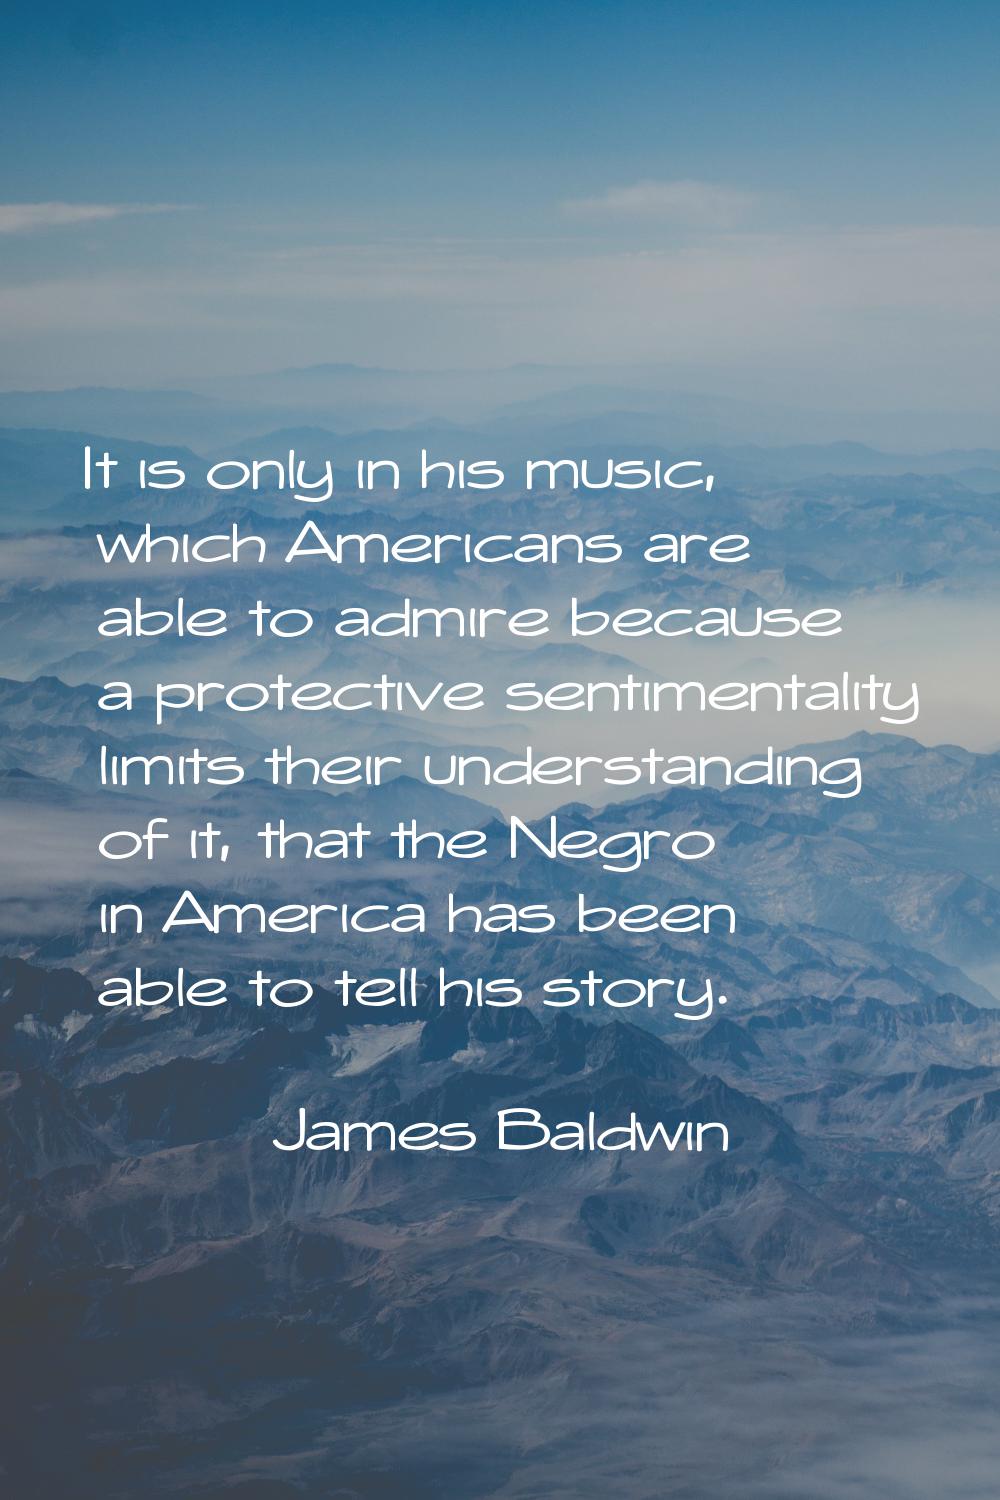 It is only in his music, which Americans are able to admire because a protective sentimentality lim